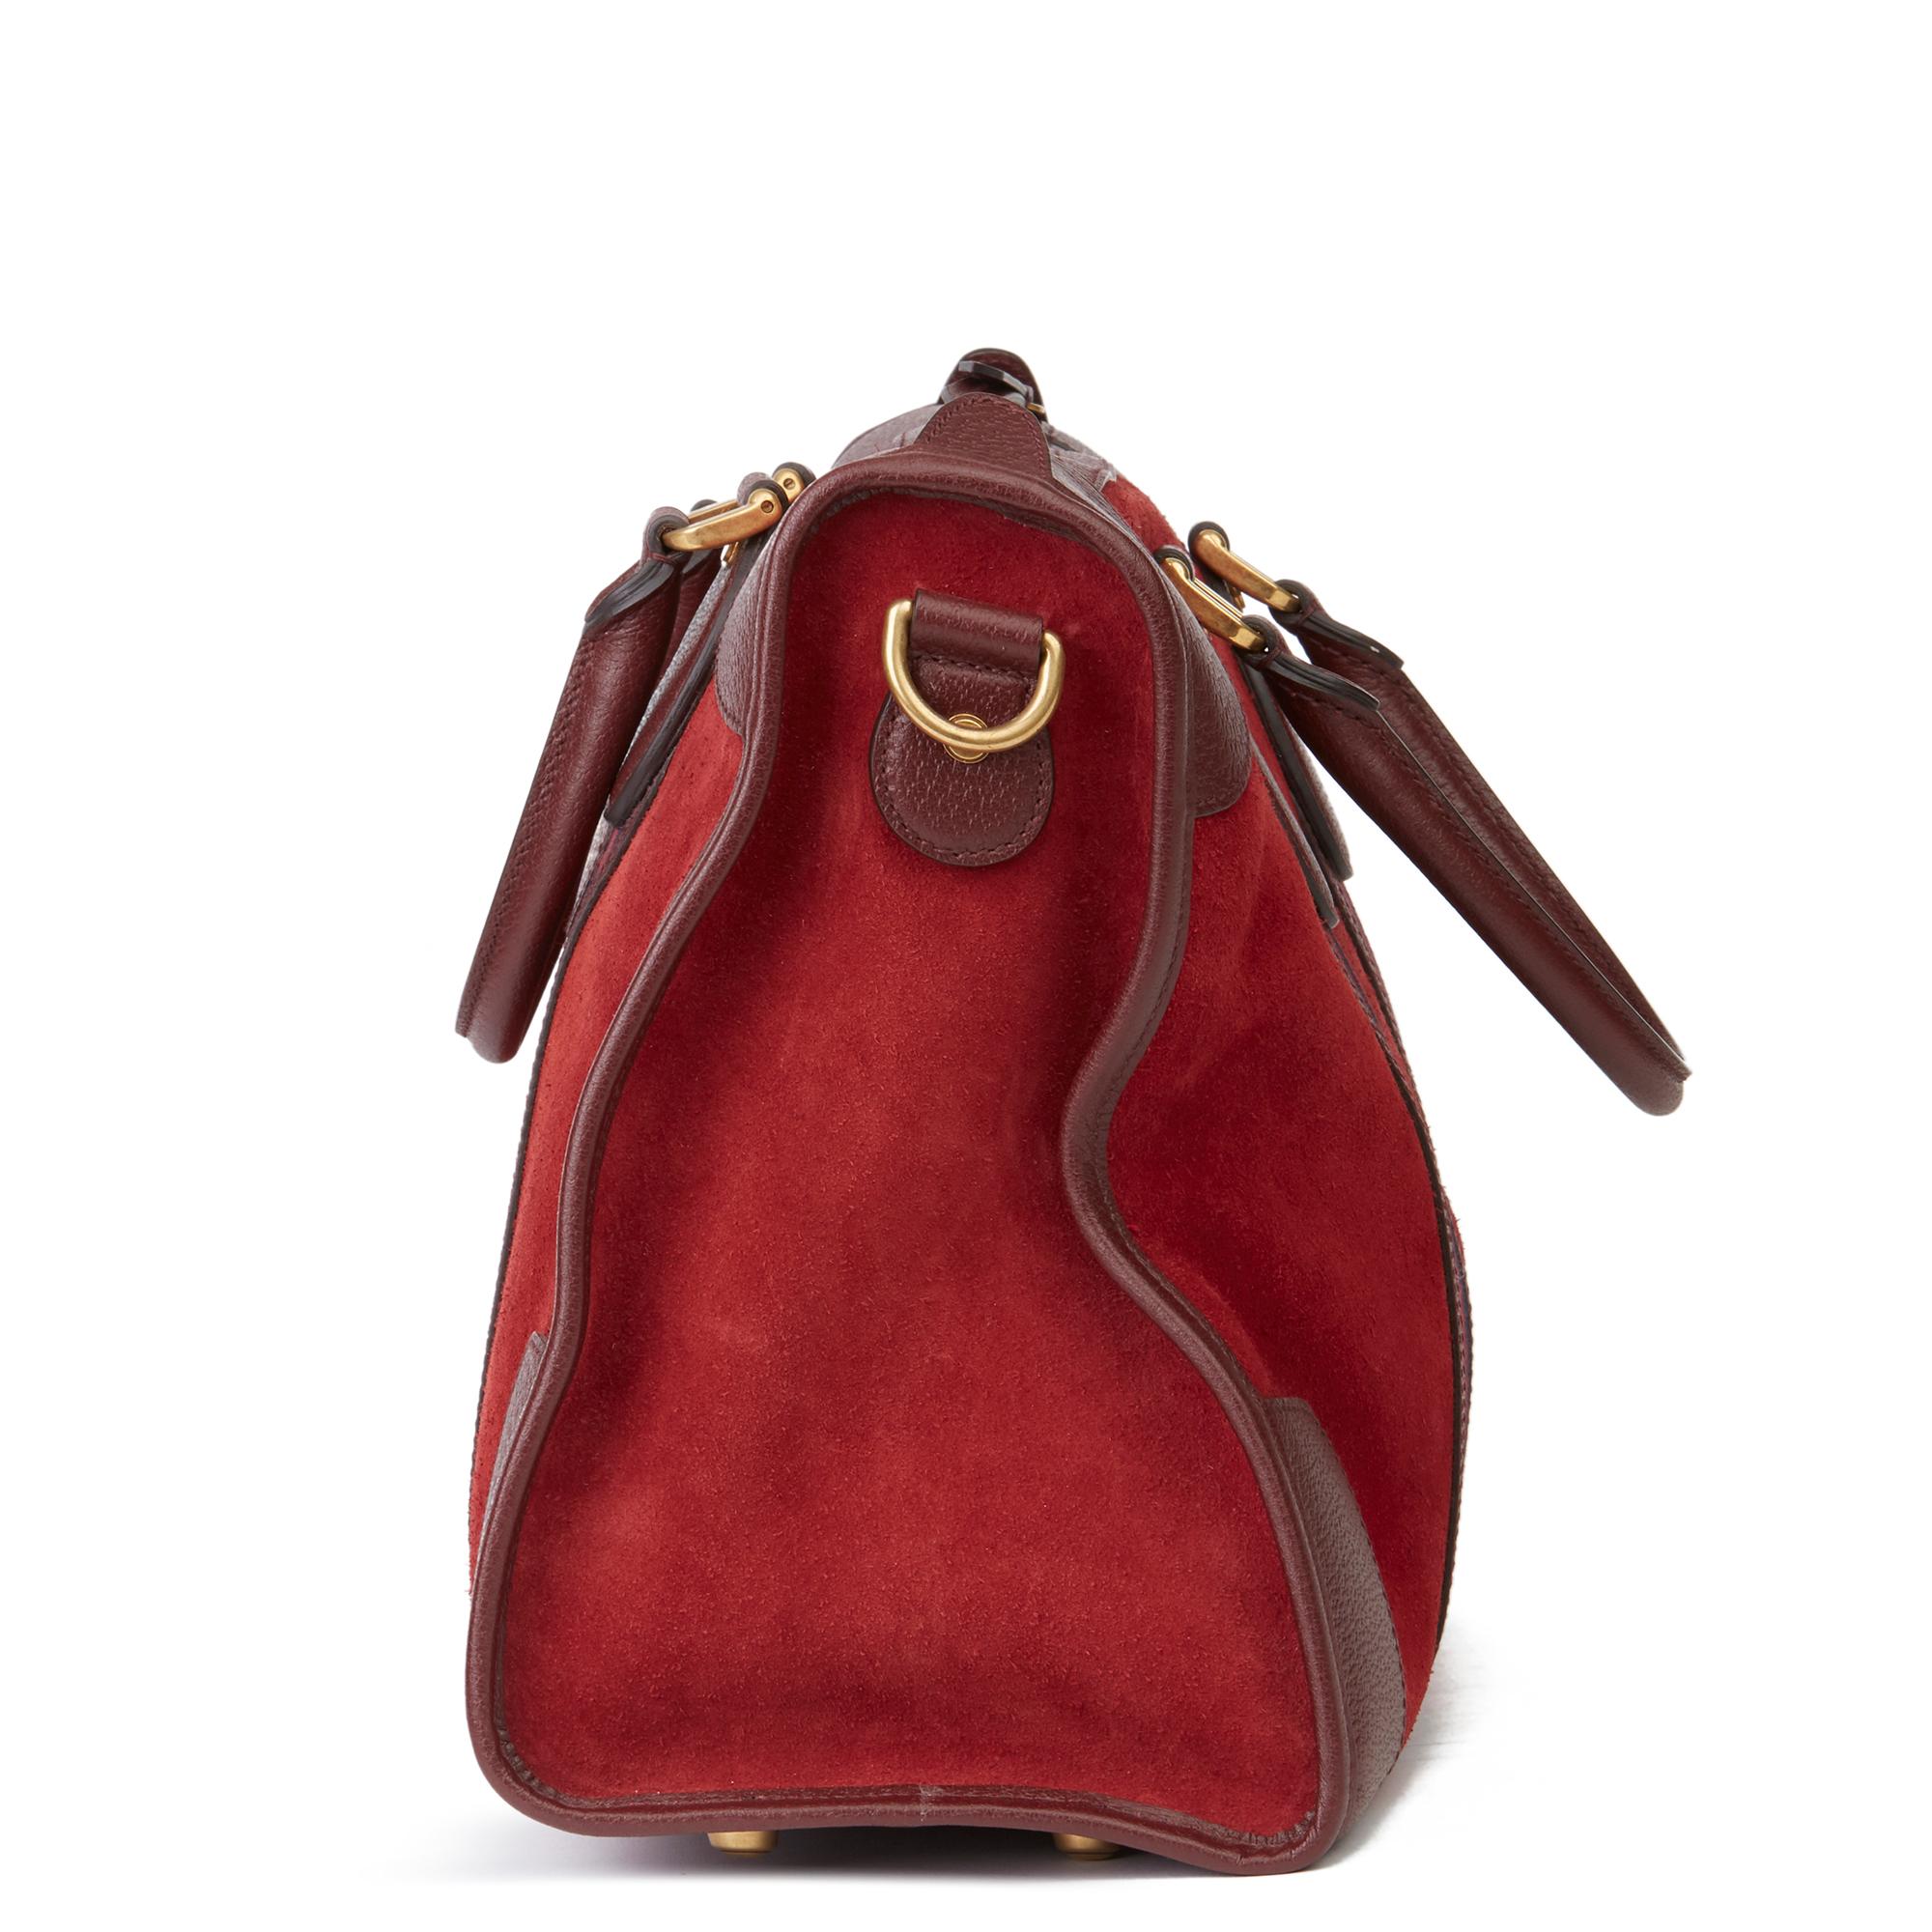 GUCCI
Red Suede & Burgundy Pigskin Web Medium Duffle Bag

Xupes Reference: HB3226
Serial Number: 459311 467891
Age (Circa): 2019
Accompanied By: Gucci Dust Bag, Care Booklet, Leather Swatch, Shoulder Strap
Authenticity Details: Serial Stamp (Made in